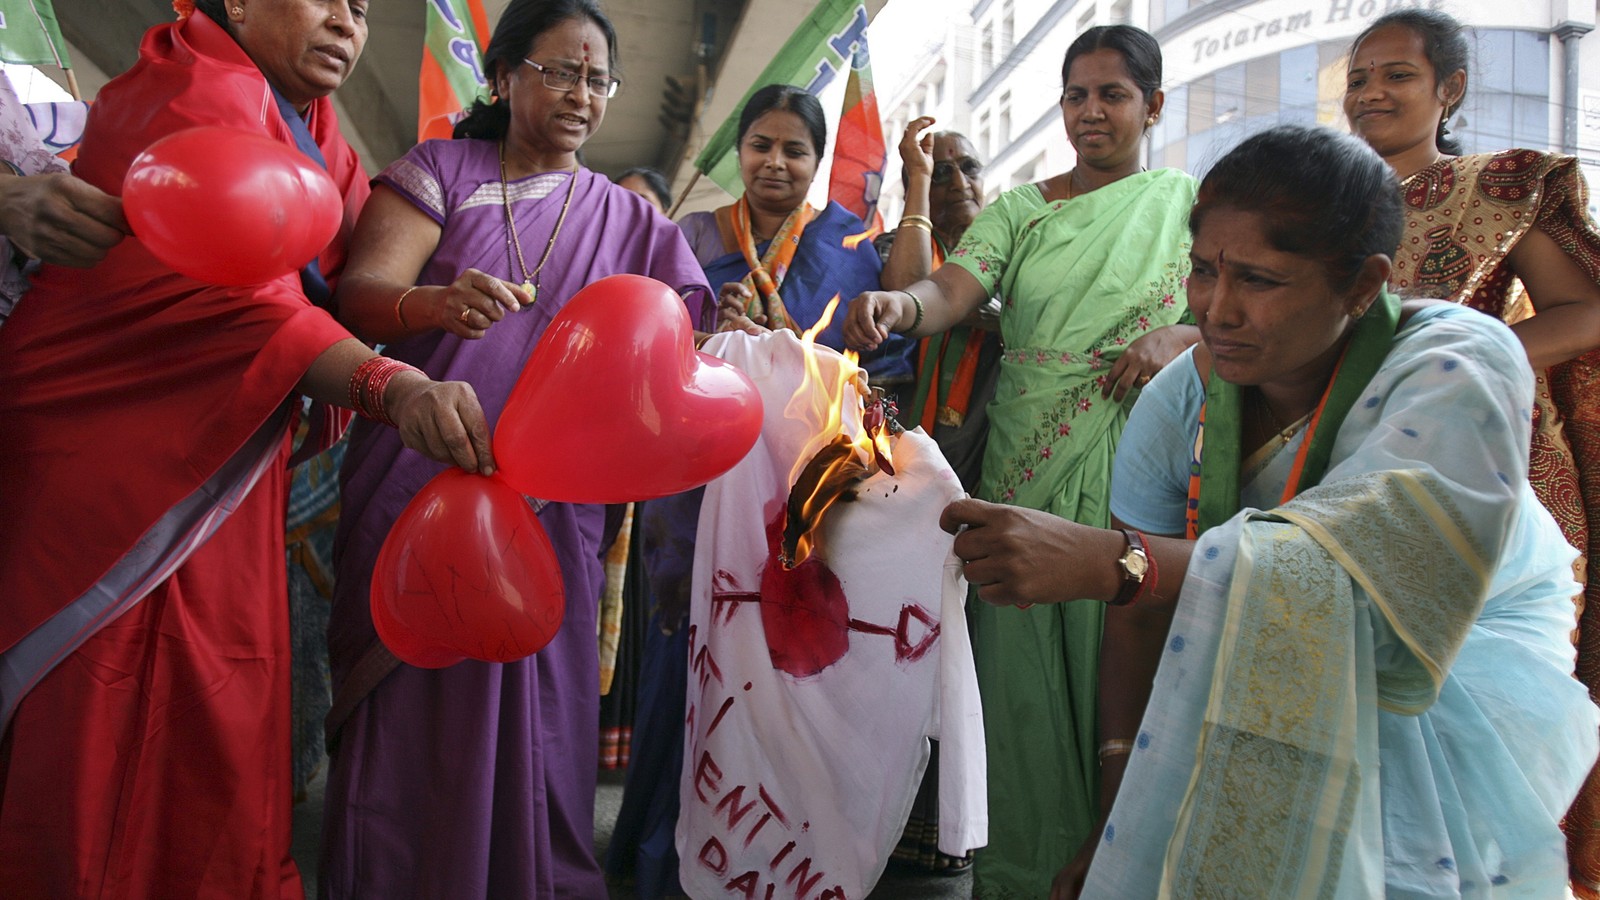 Girls Xxx Hq Video Downloader - The War on Valentine's Day in India - The Atlantic